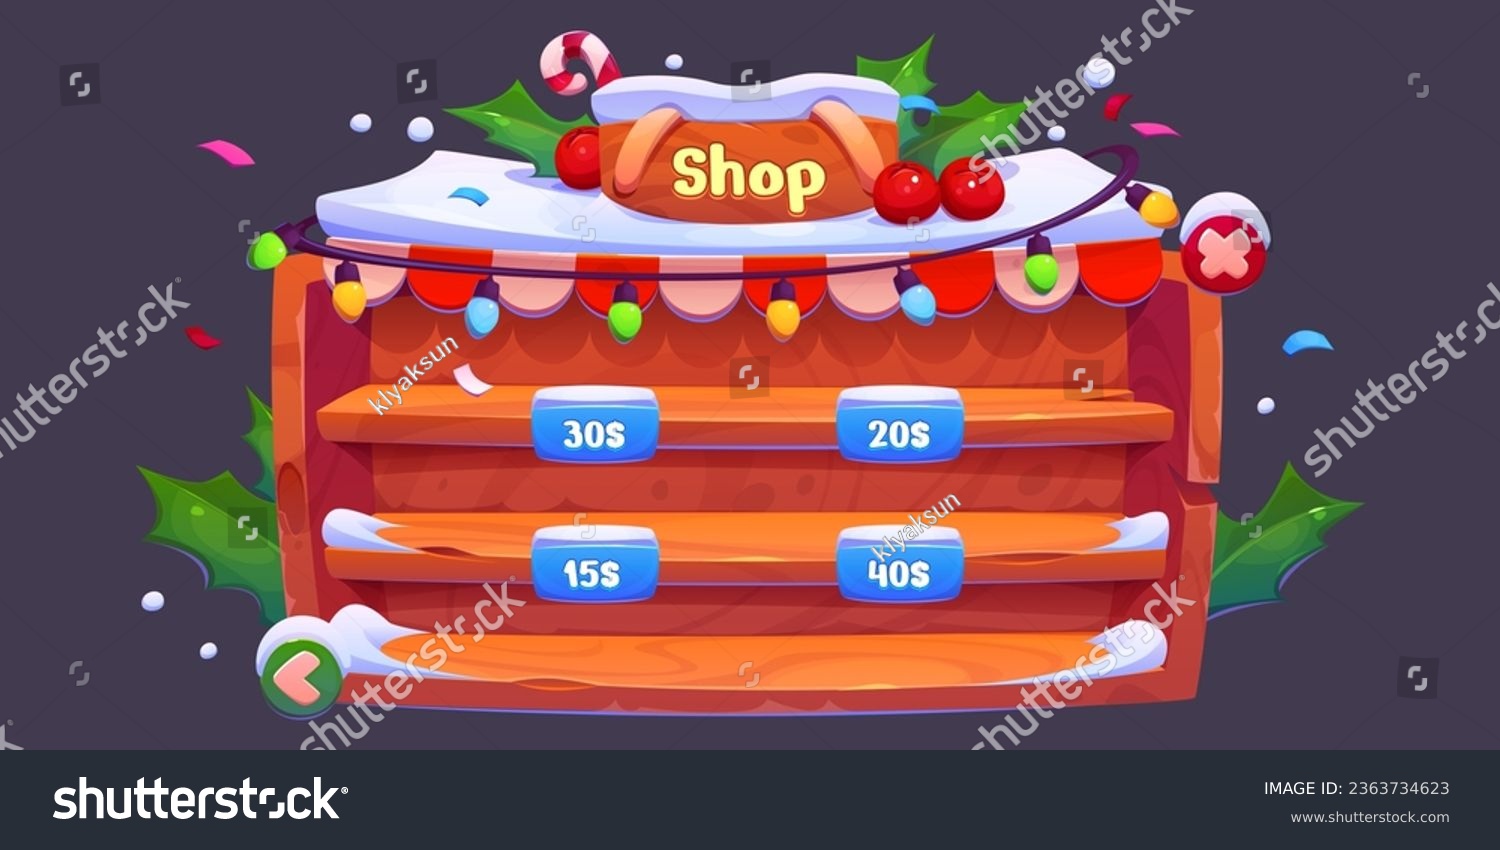 SVG of Game shop Christmas interface - cartoon vector ui snowy wooden rack with shelves and prices. Empty store panel. Fantasy showcase with snow and holly plant. Xmas gui design of retail displays. svg